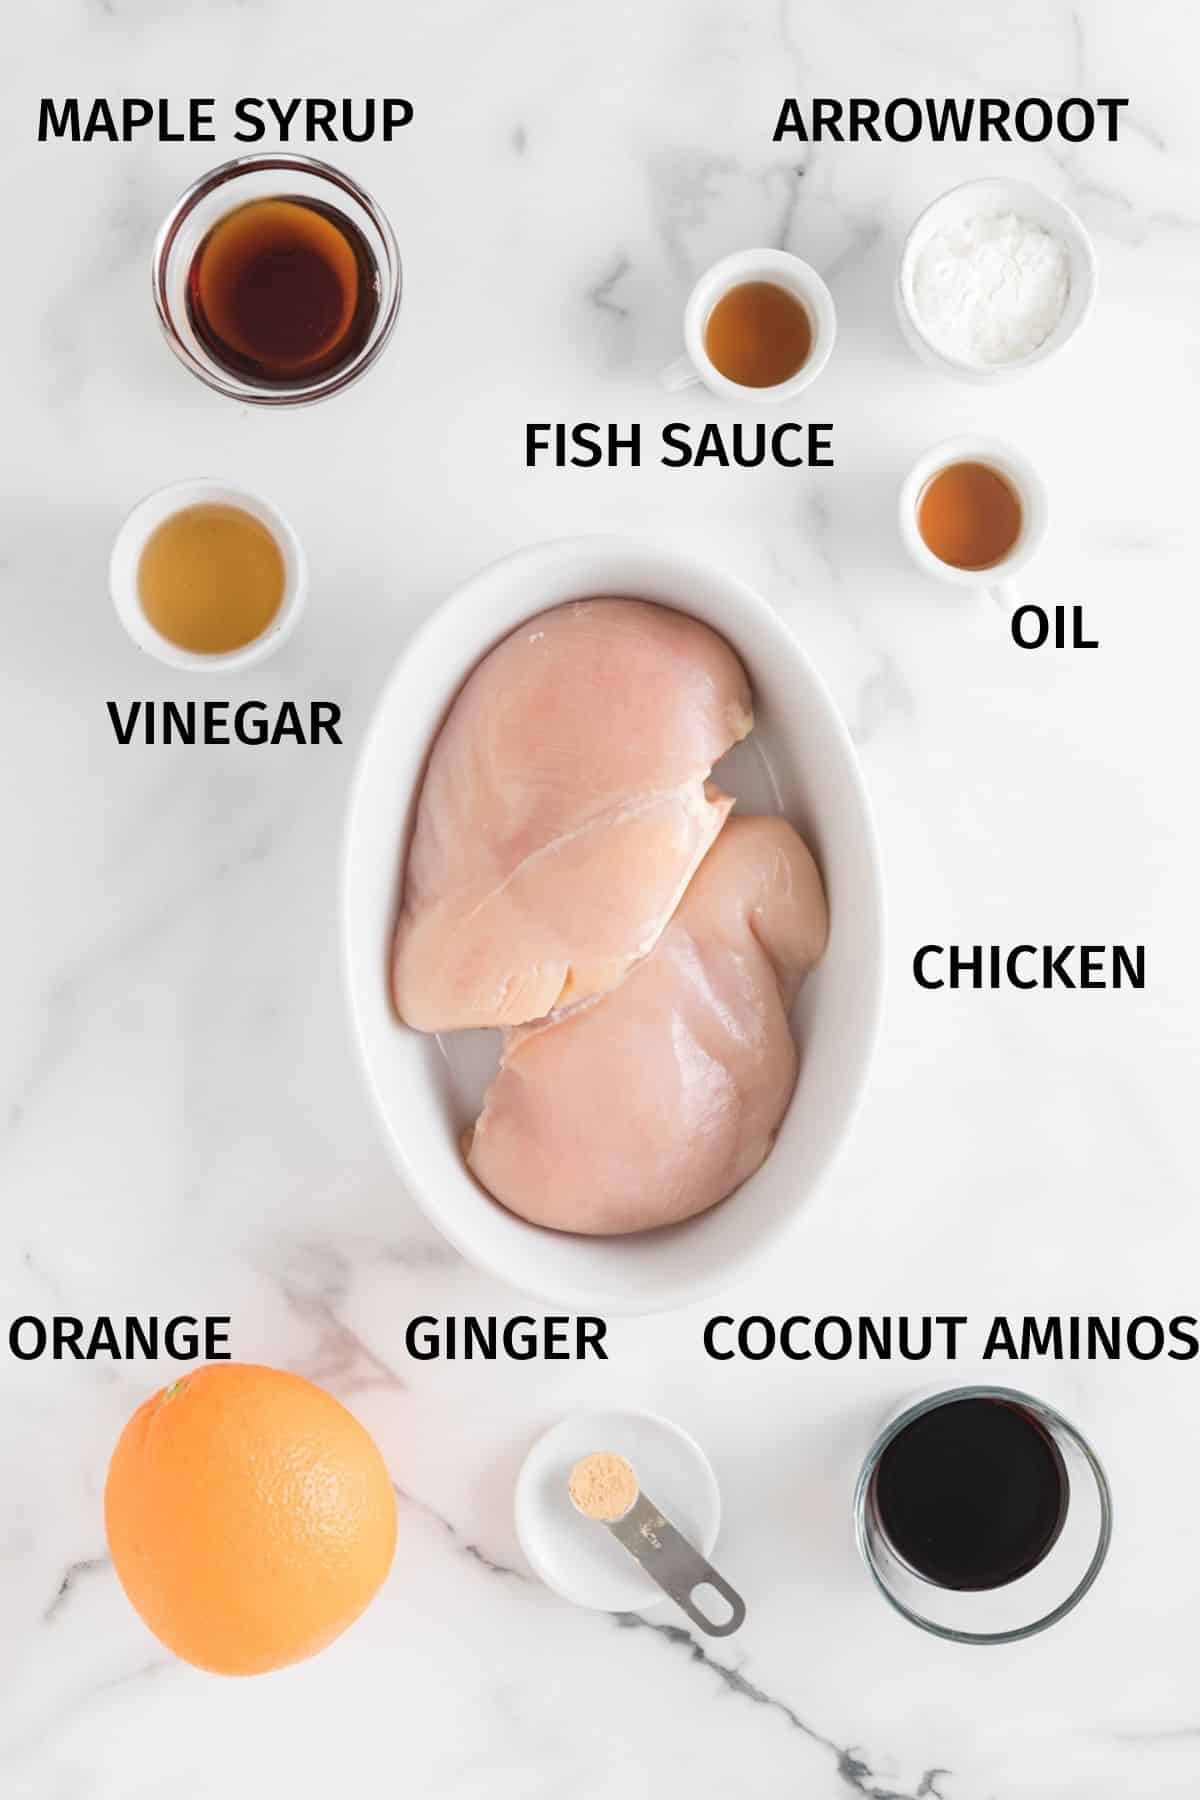 Ingredients for Air Fryer Orange Chicken in small bowls on a white surface.